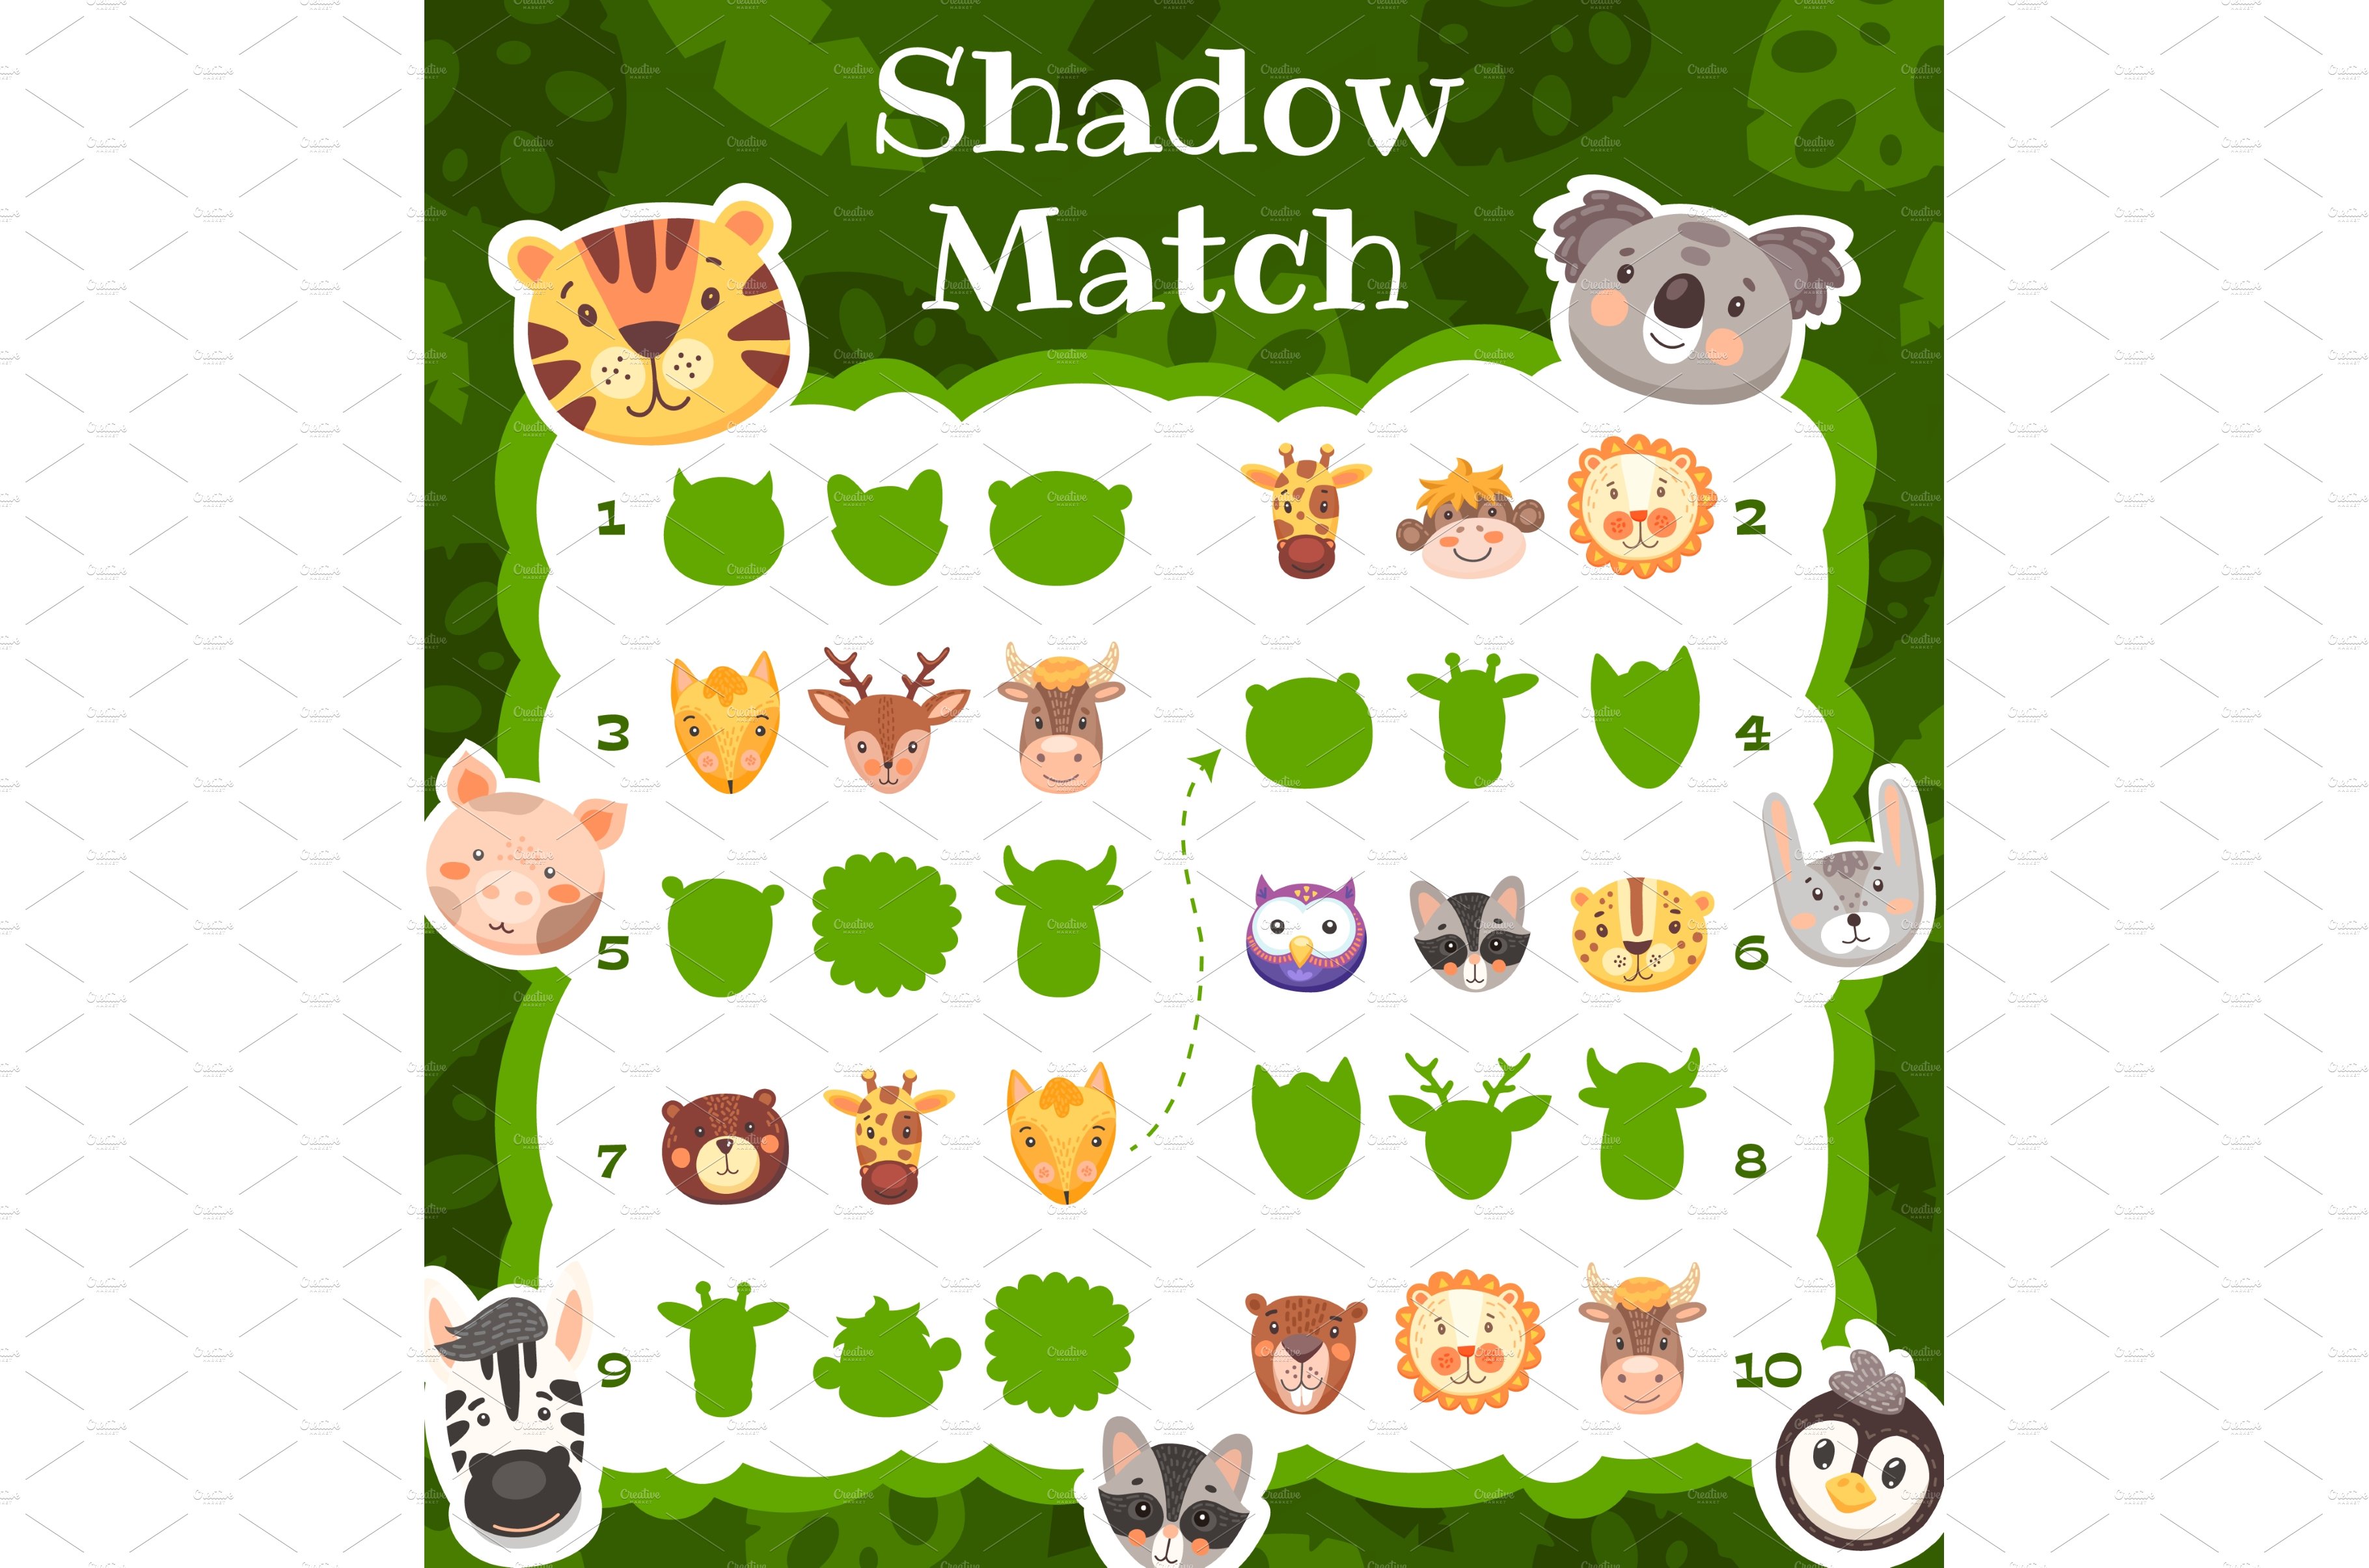 Shadow match game with animals cover image.